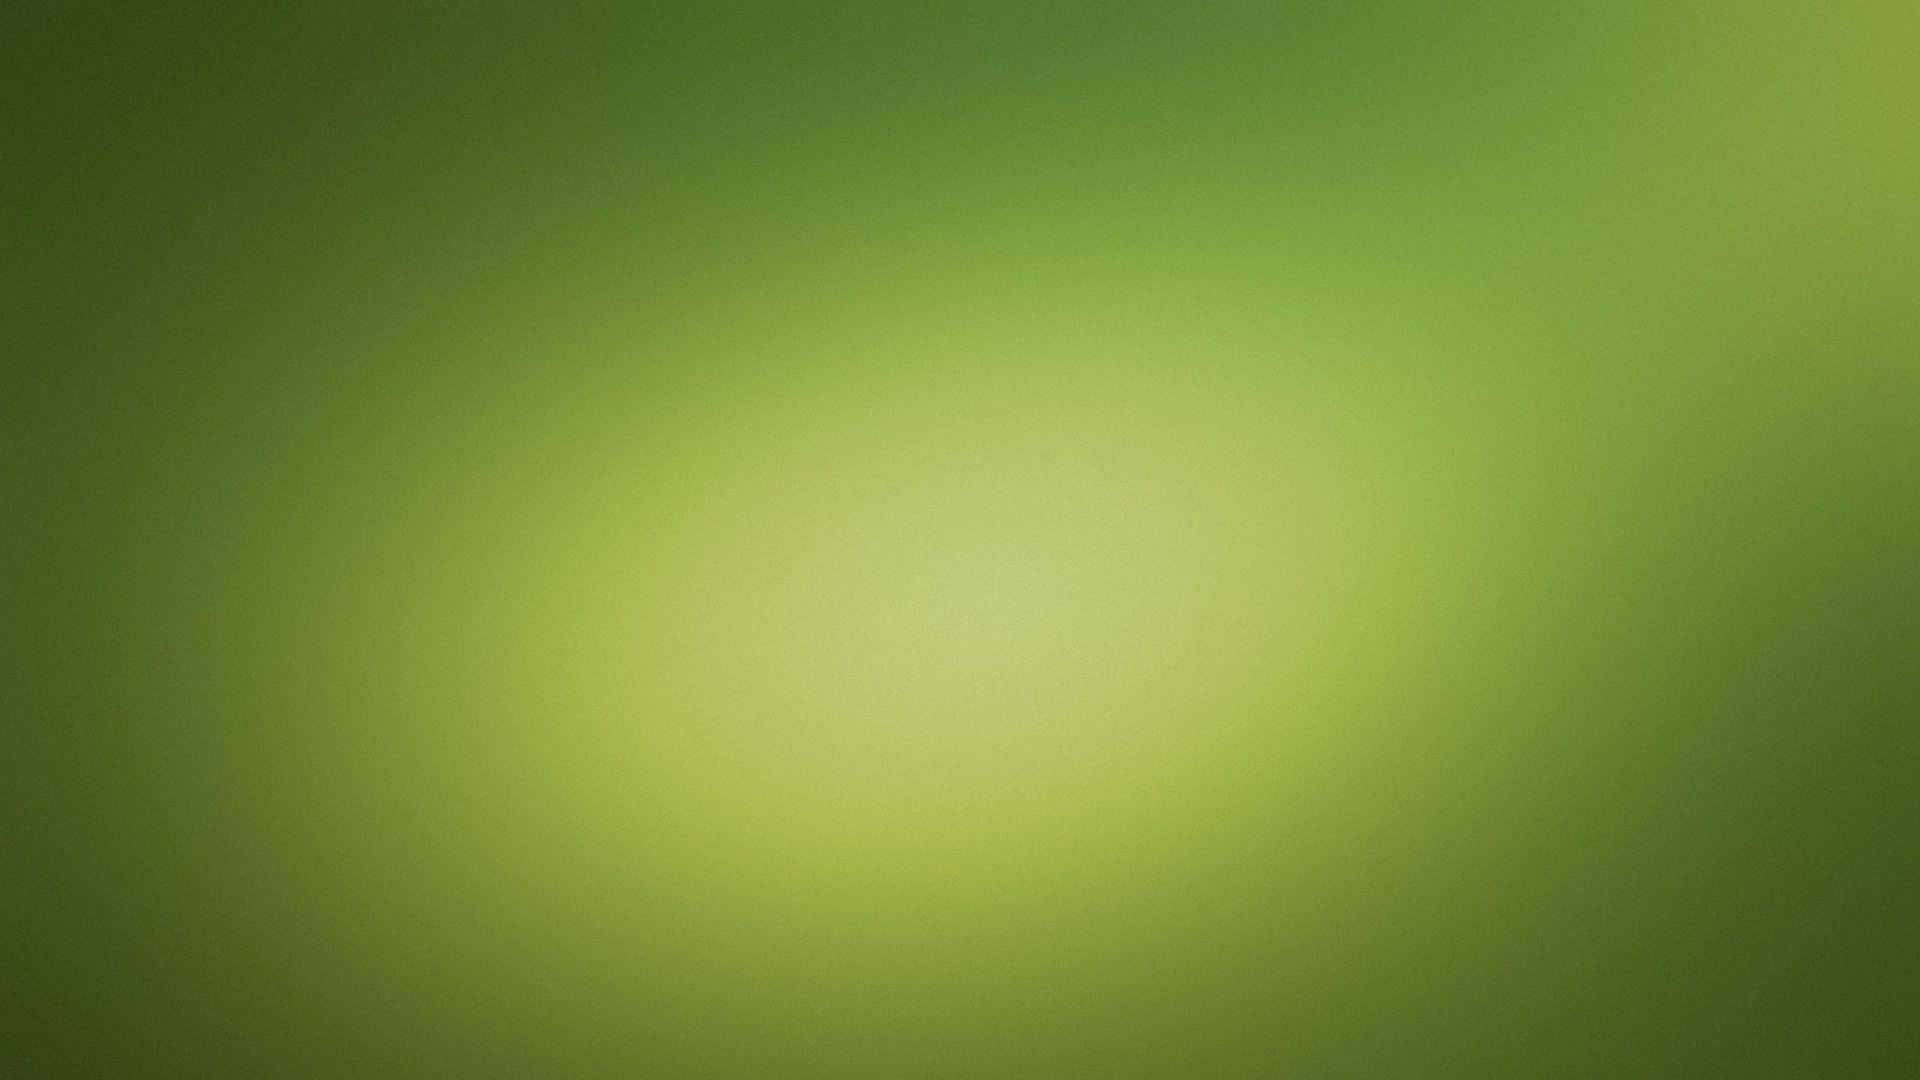 Download Light Green Background Wallpaper in 1920x1080 Resolution